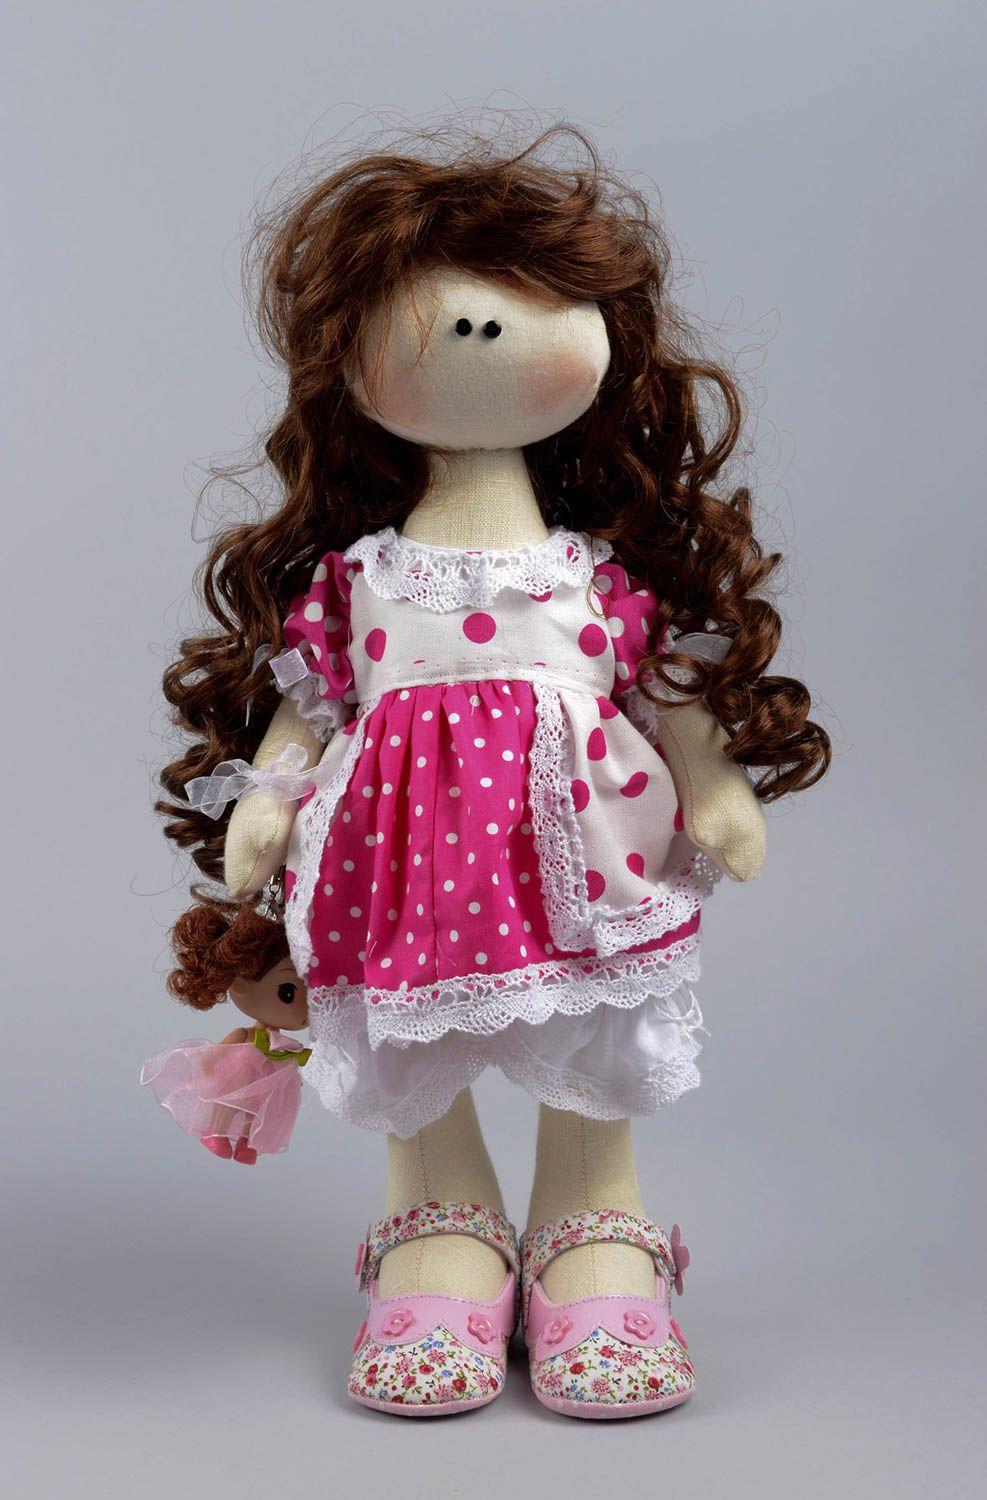 Handmade soft toy cute childrens toys rag doll for girls gift ideas for kids photo 1